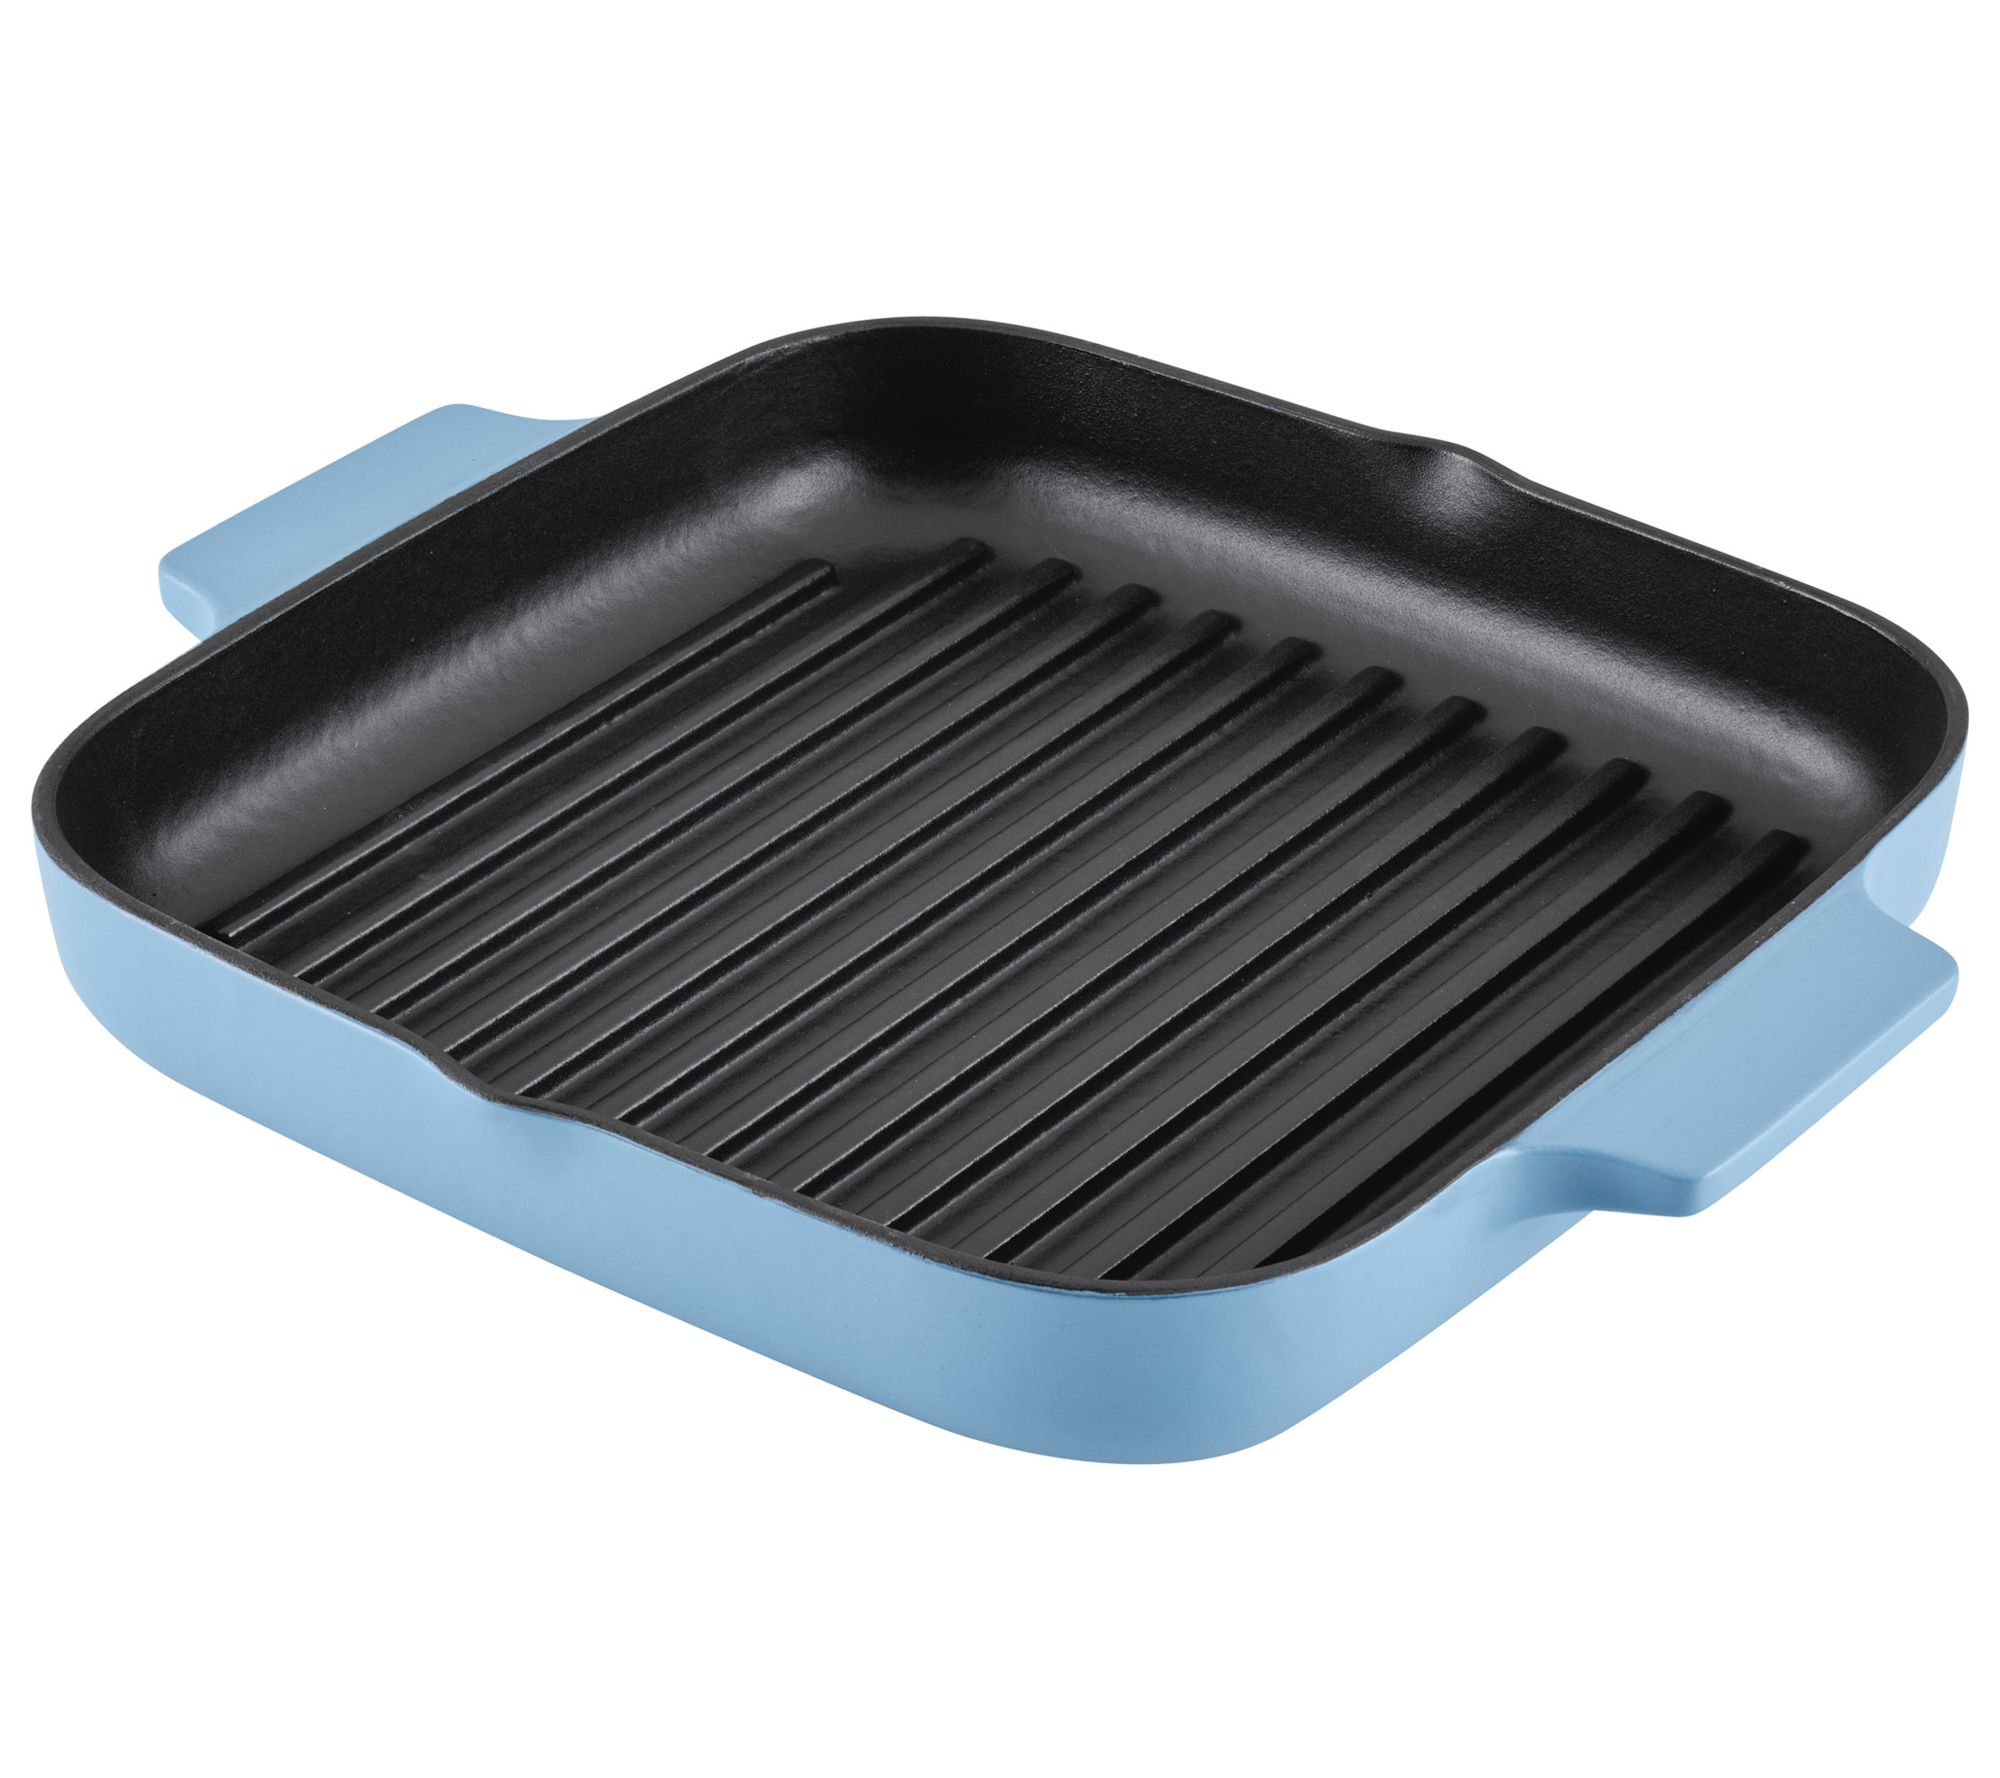 KitchenAid Hard Anodized Induction Nonstick Stovetop Grill Pan